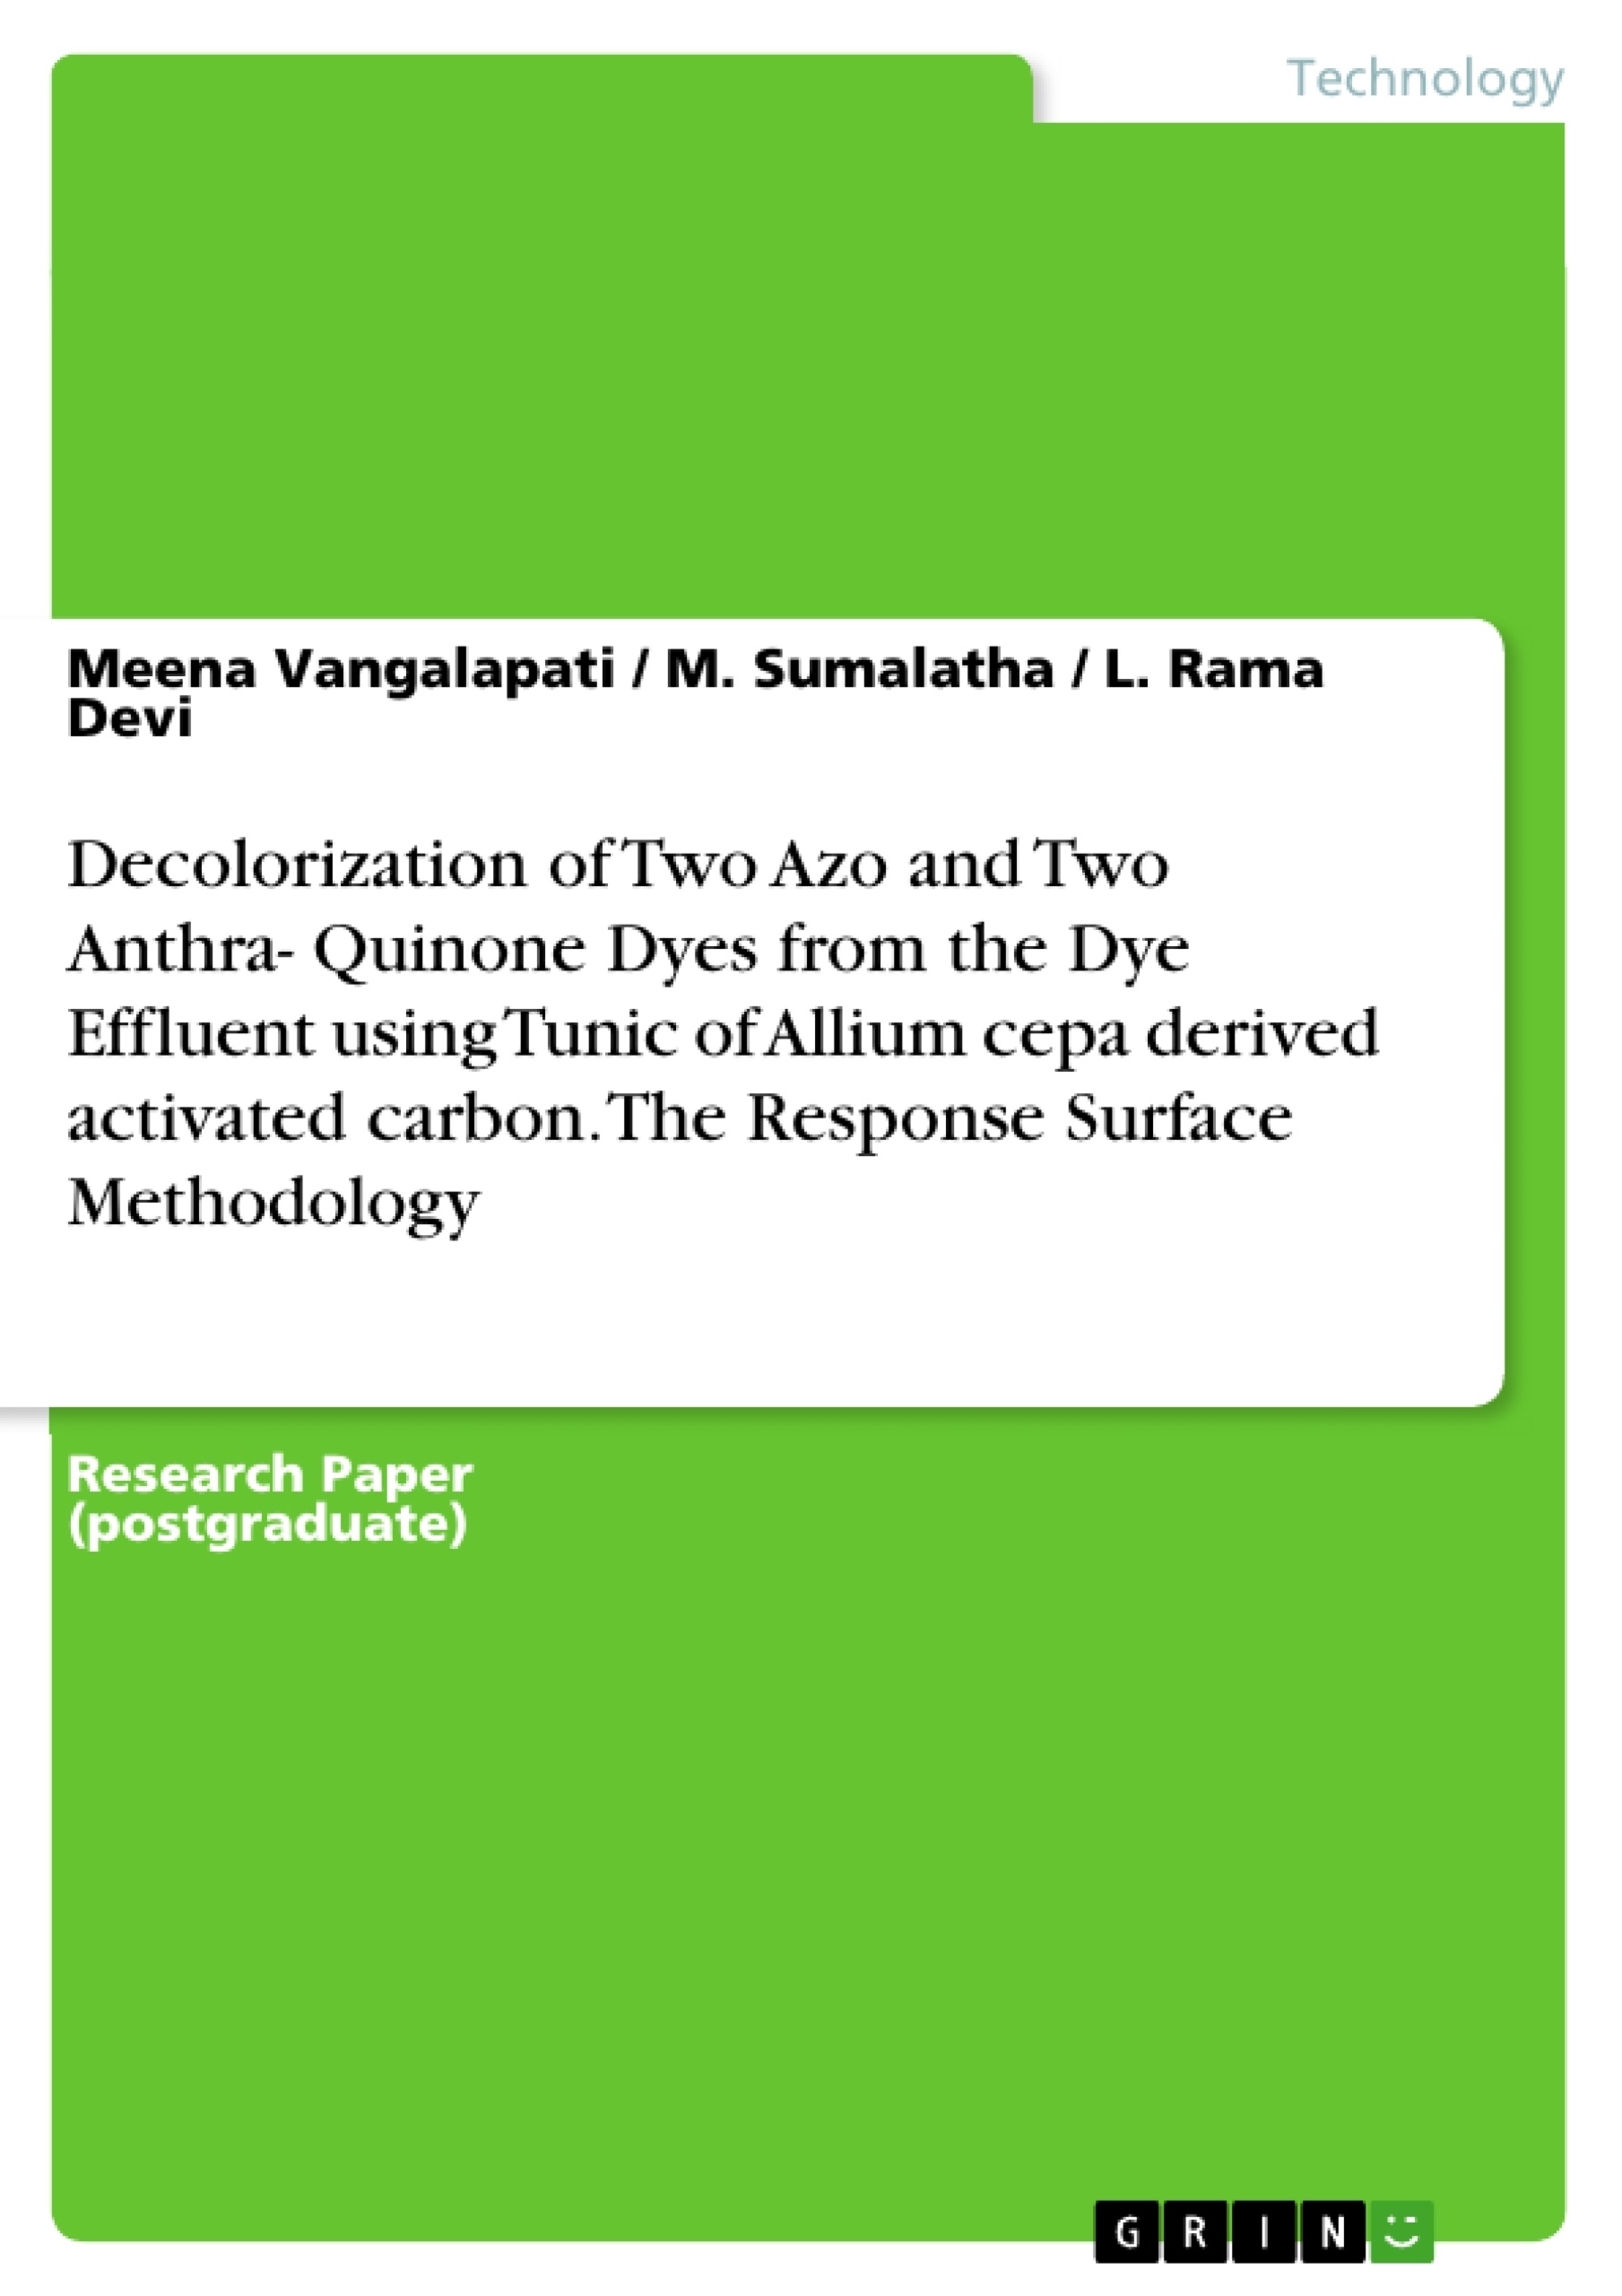 Titel: Decolorization of Two Azo and Two Anthra- Quinone Dyes from the Dye Effluent using Tunic of Allium cepa derived activated carbon.  The Response Surface Methodology